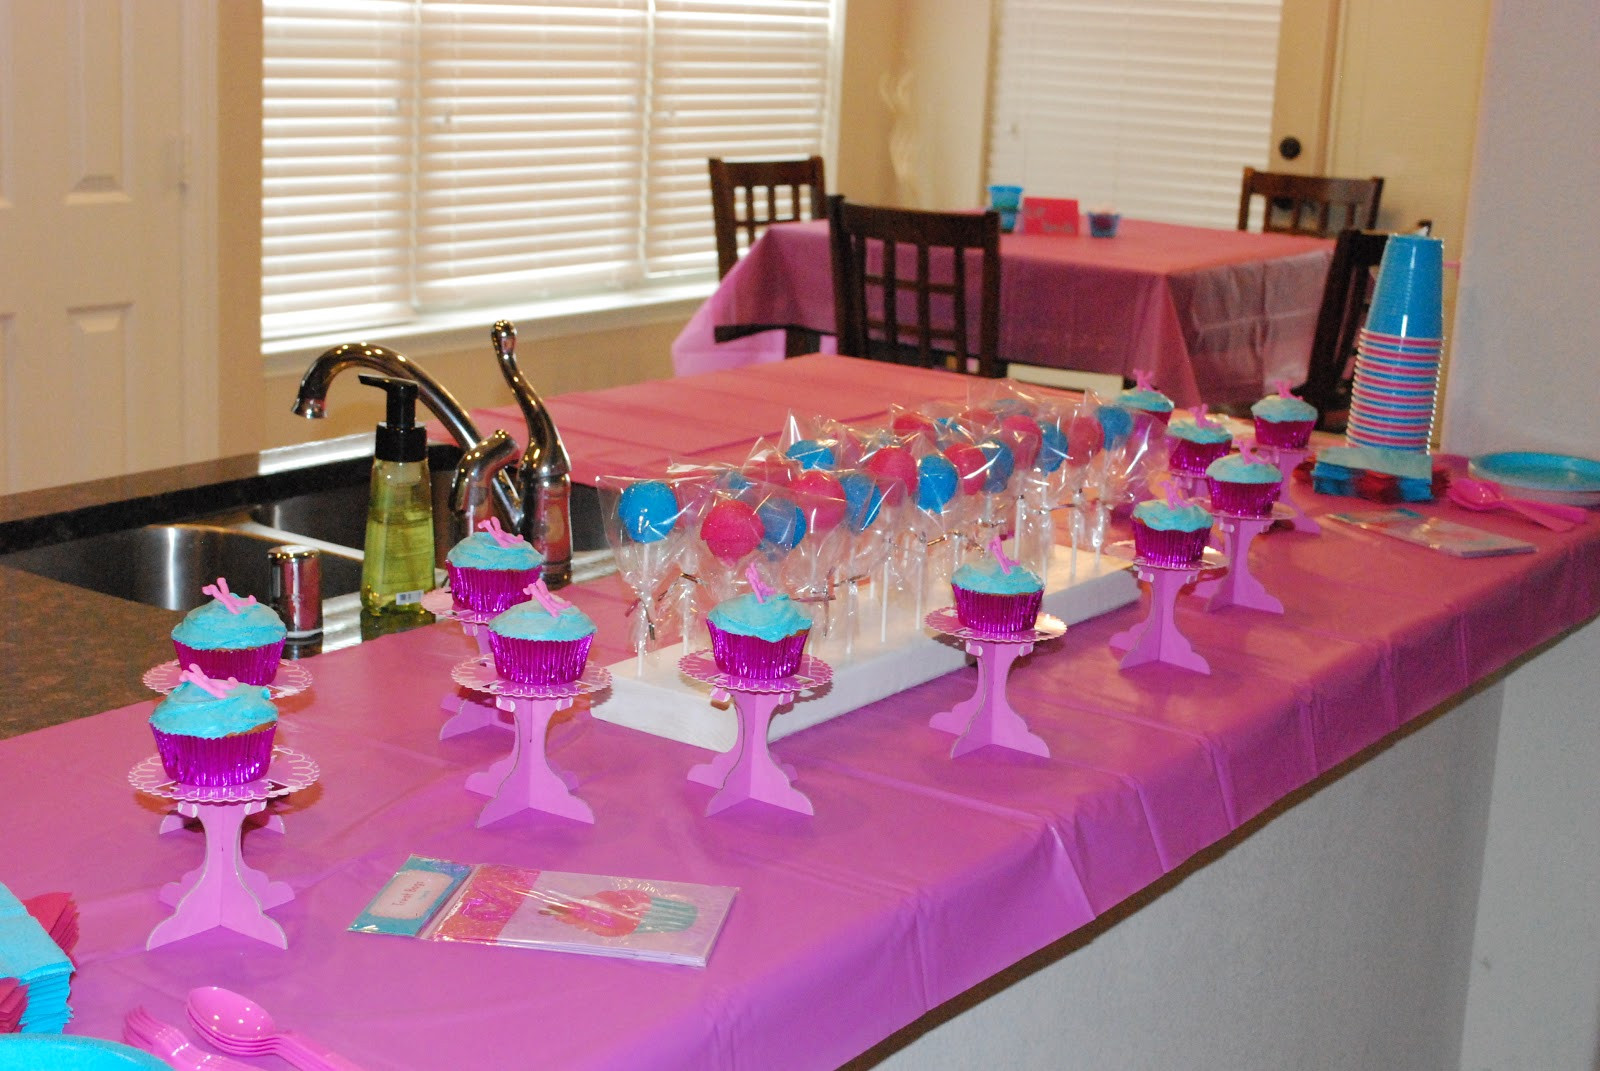 Birthday Party Ideas For 11 Year Olds
 The Simple Life SPArty Birthday Party for my 11 Year Old